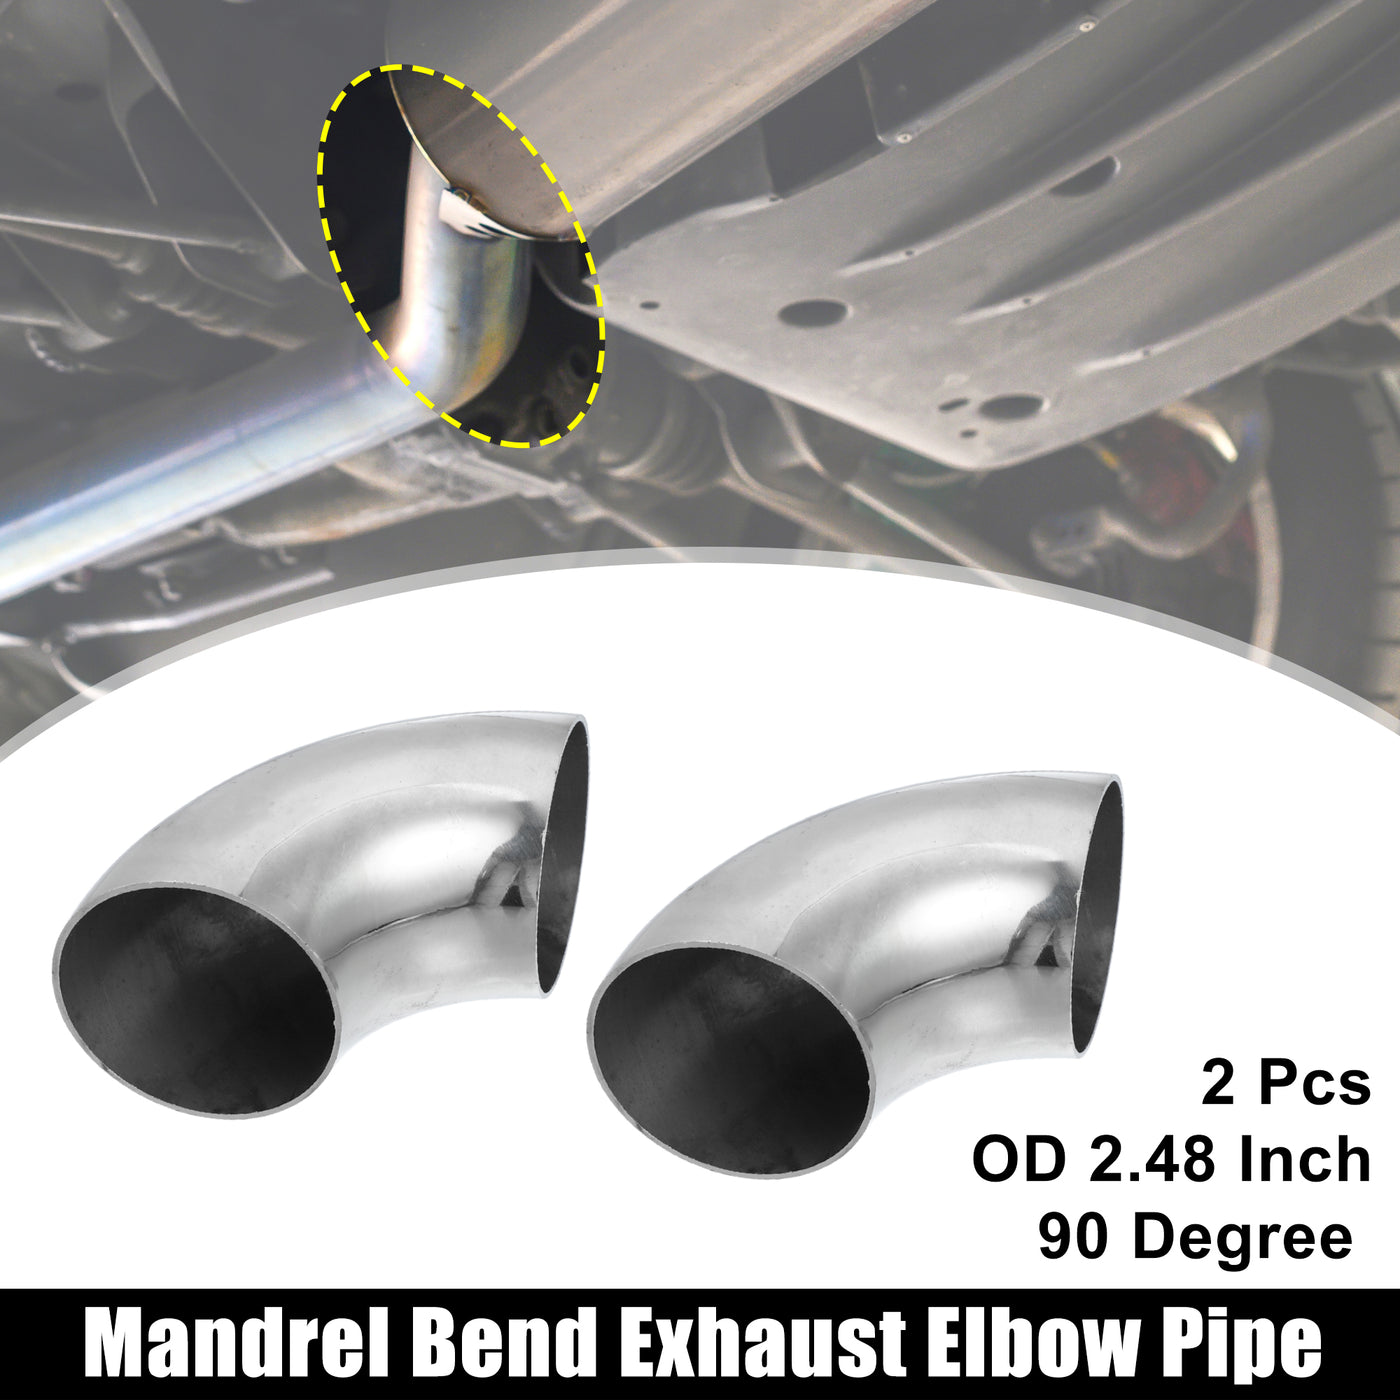 X AUTOHAUX 2pcs 90 Degree Mandrel Bend Elbow SS304 Stainless Steel Bend Tube Exhaust Elbow Pipe for Car Modified Exhaust System  Piping Silver Tone